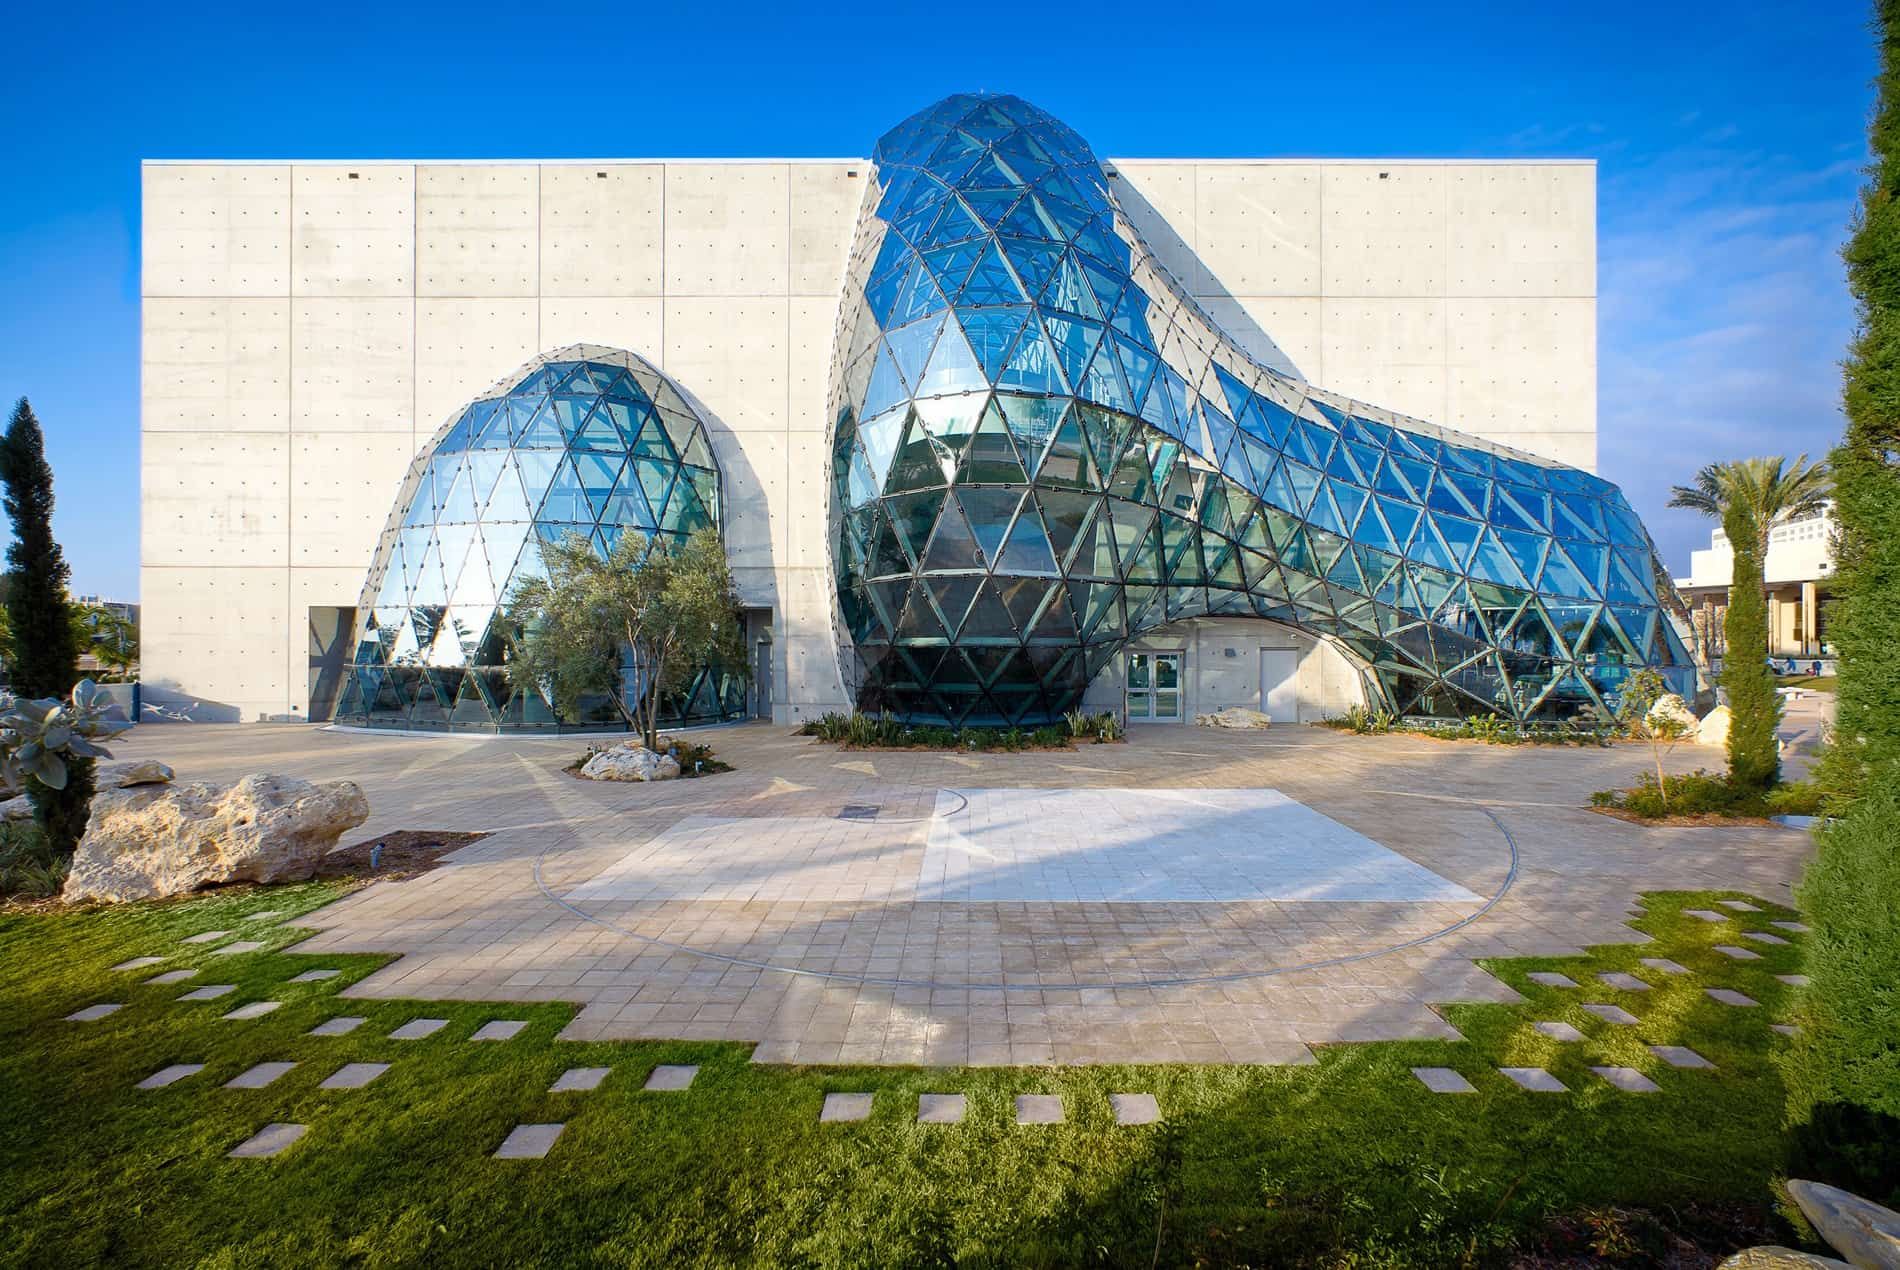 The Dali Museum at Florida by HOK